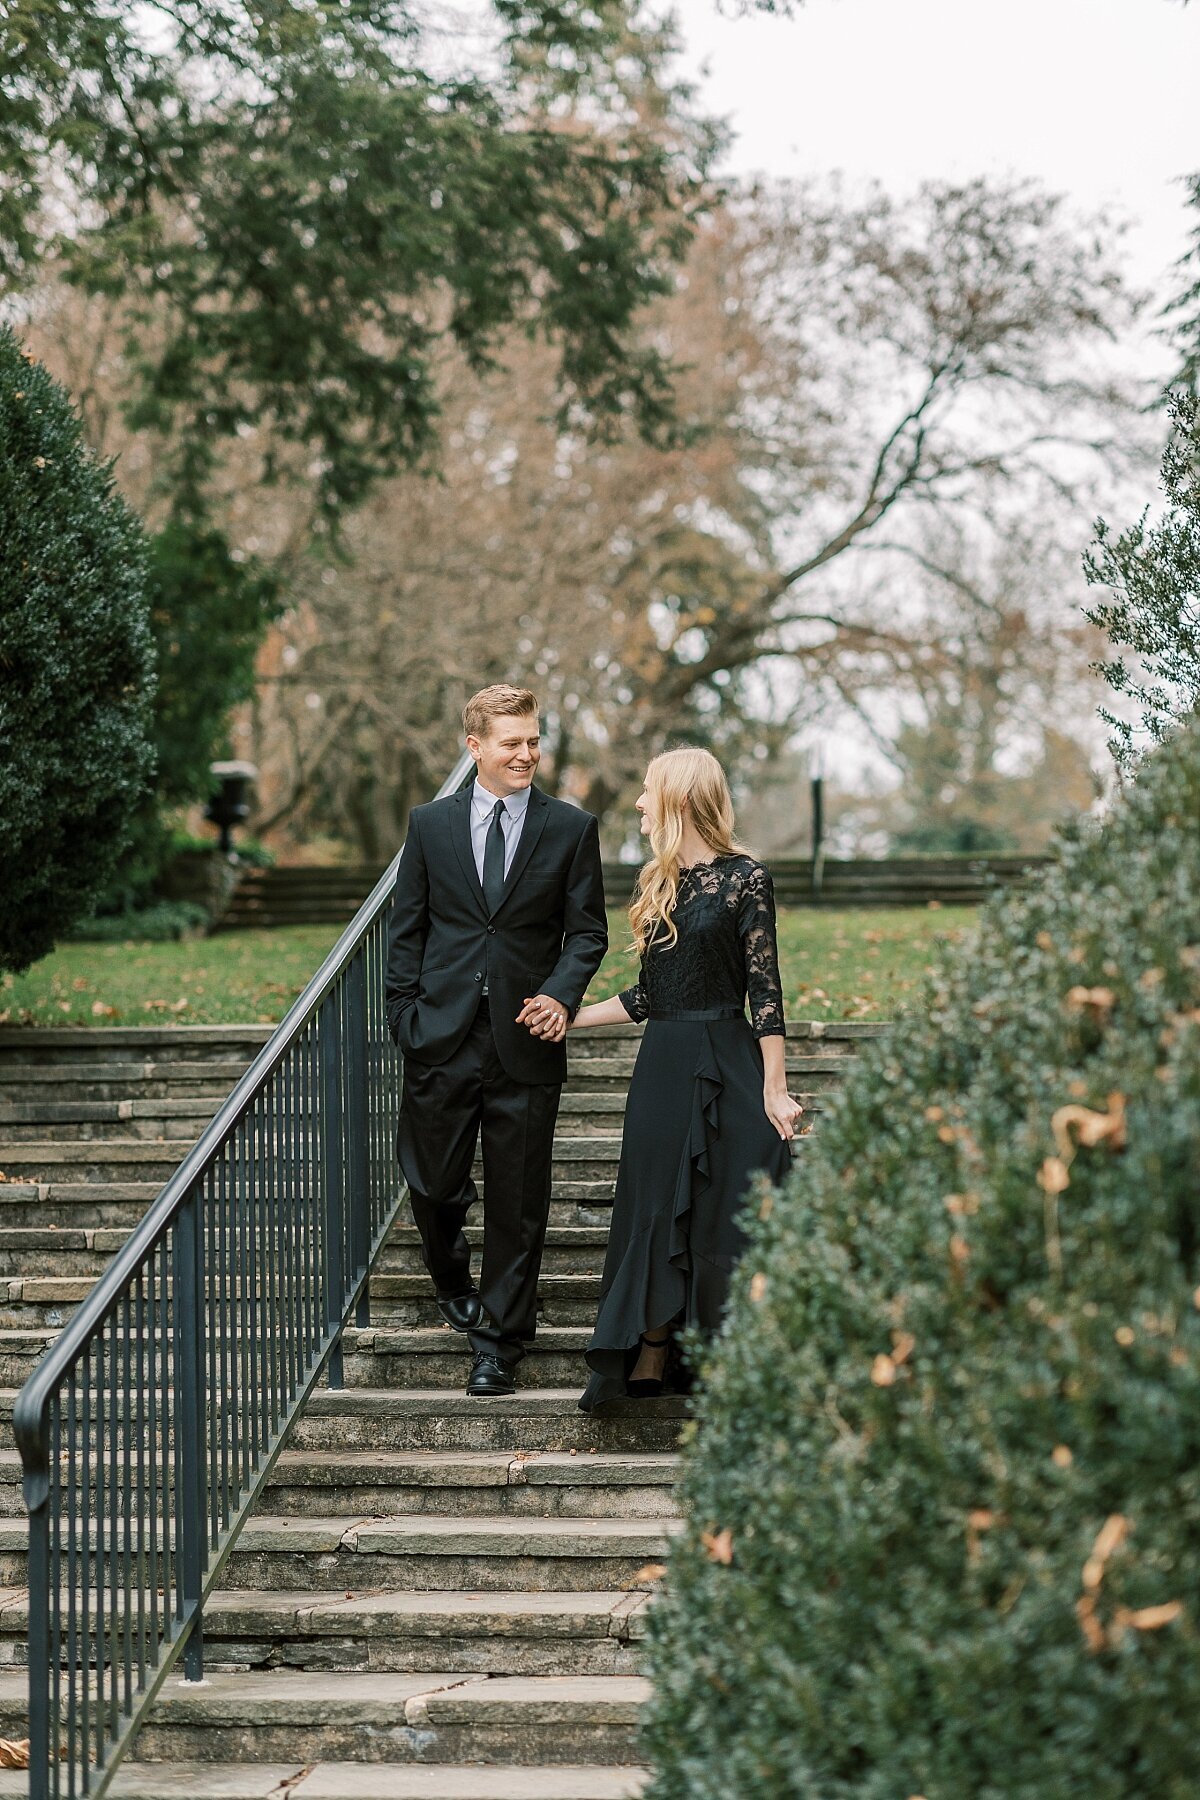 Formal engagement session at Conestoga House and Gardens